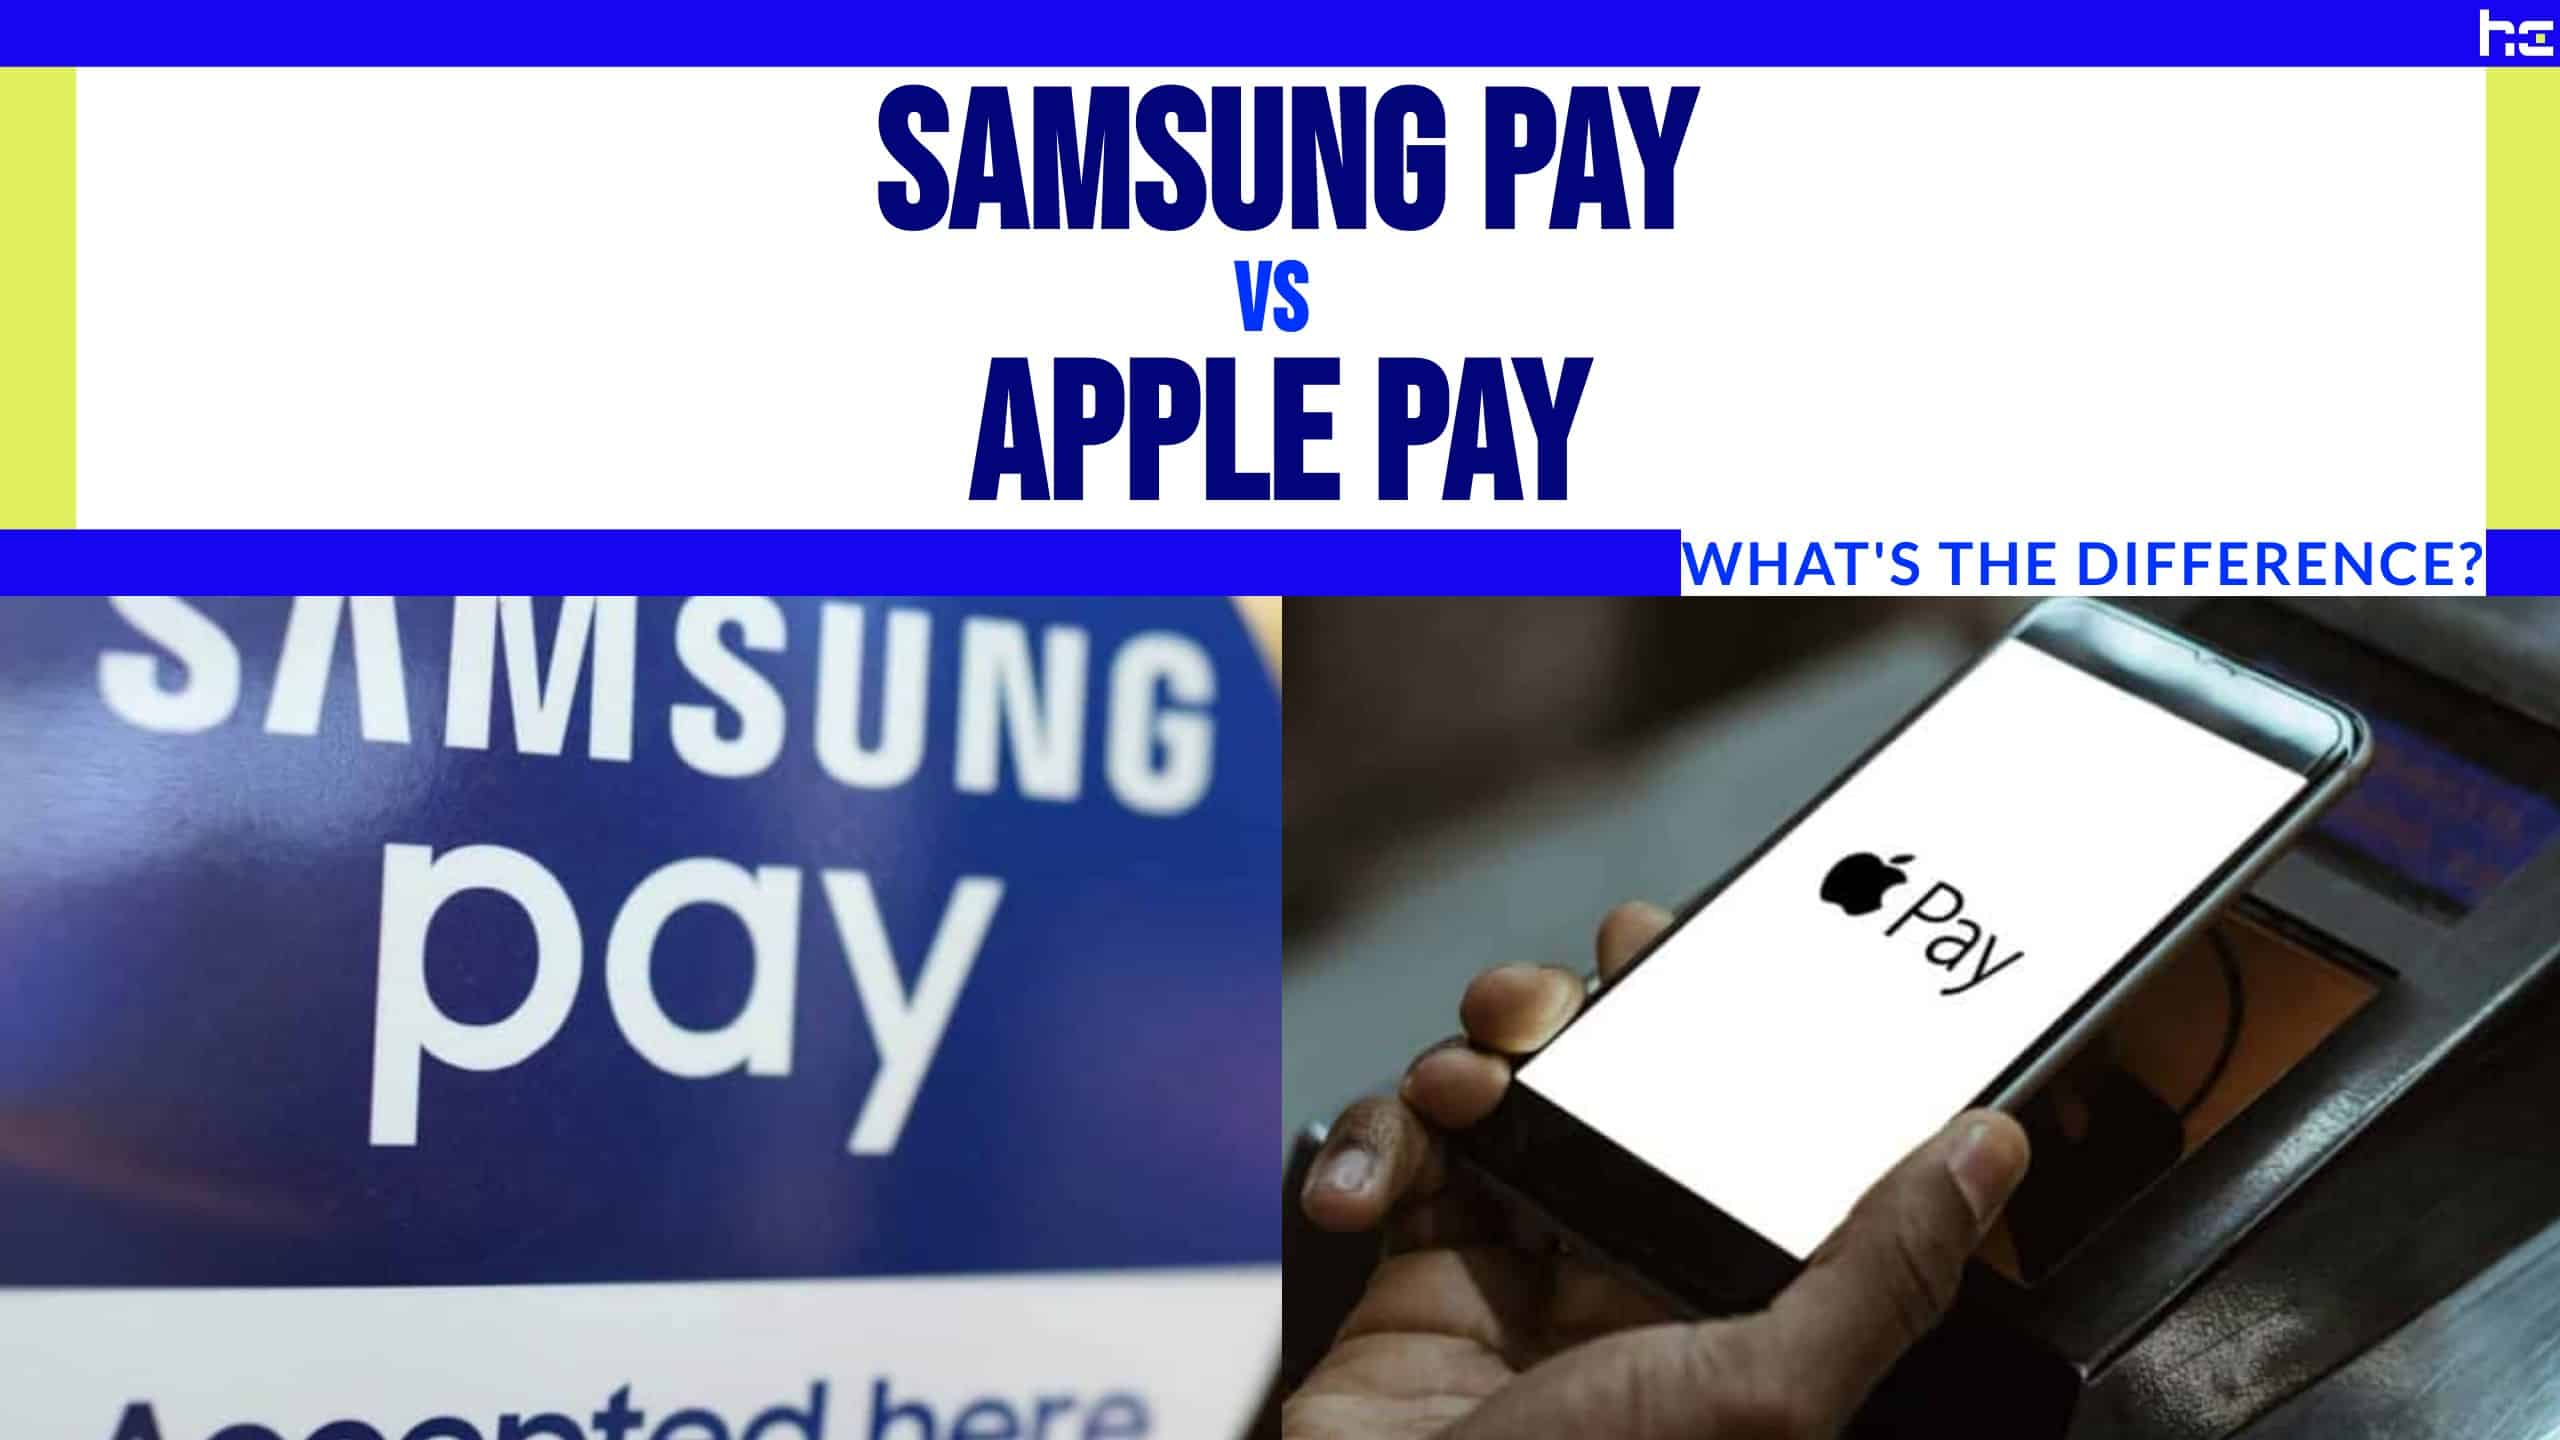 Samsung Pay vs Apple Pay featured image